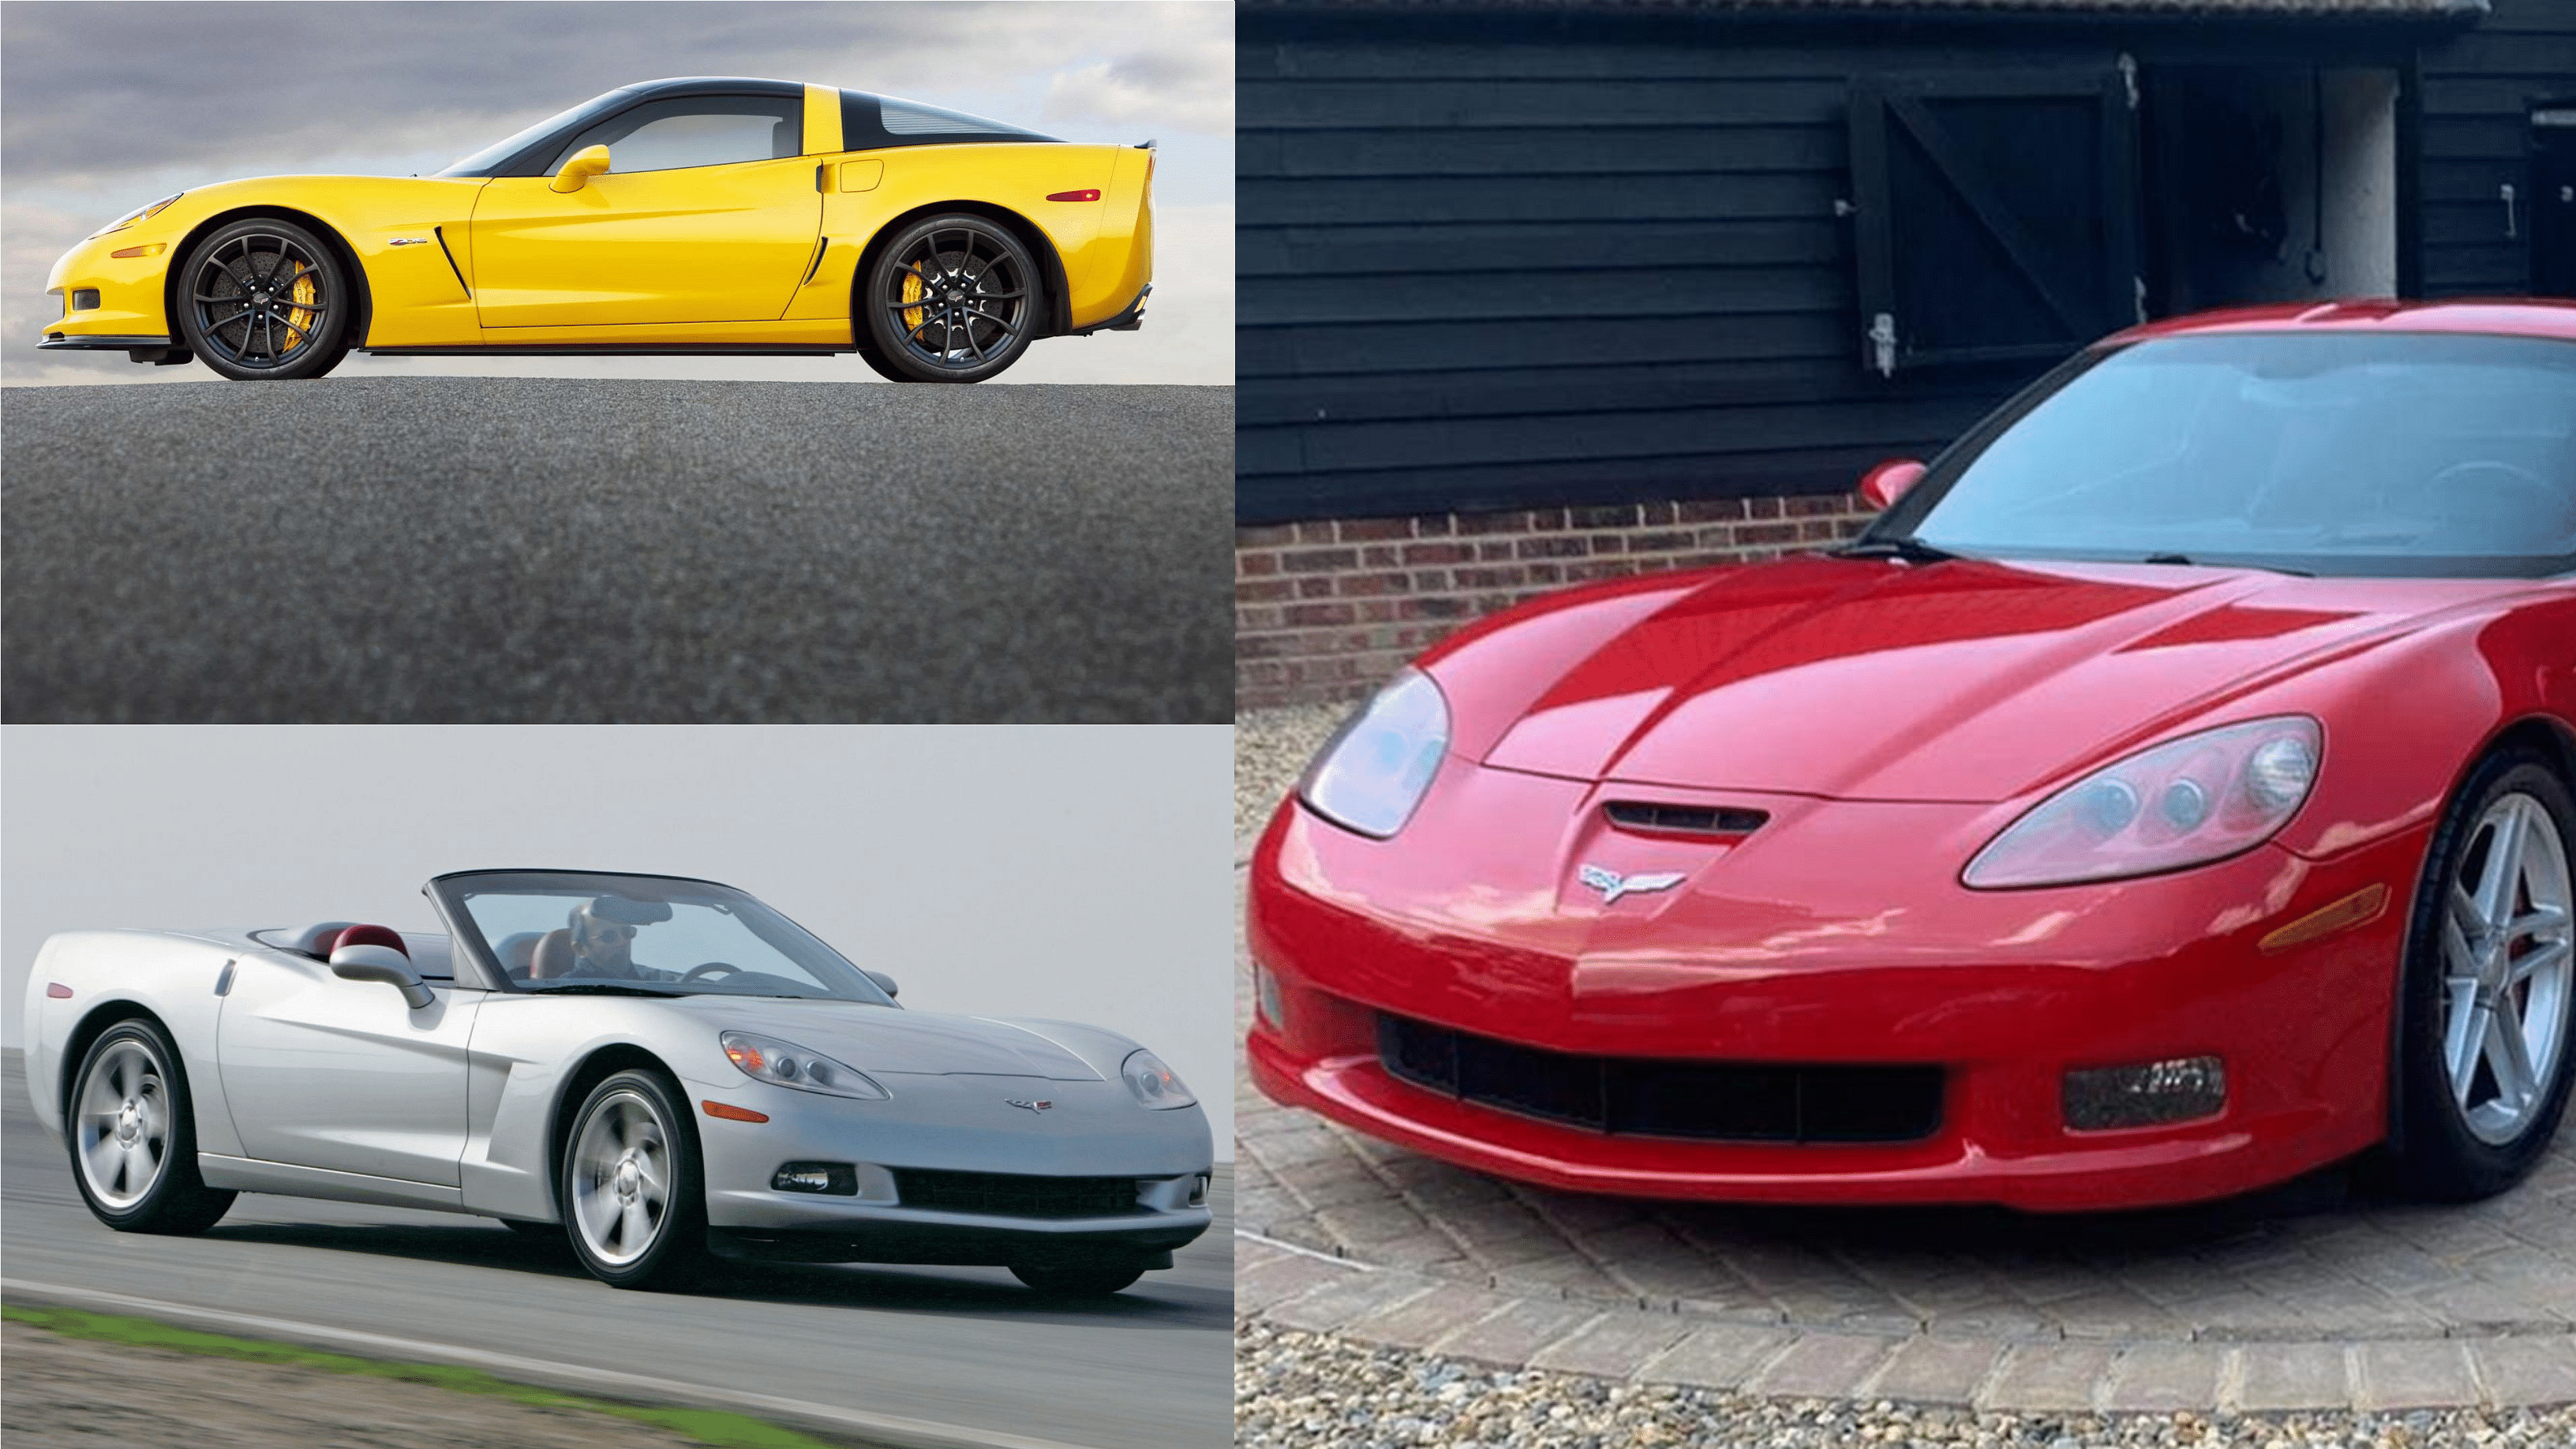 Chevrolet C6 Corvette in Yellow, Red, and Silver color - front and side view